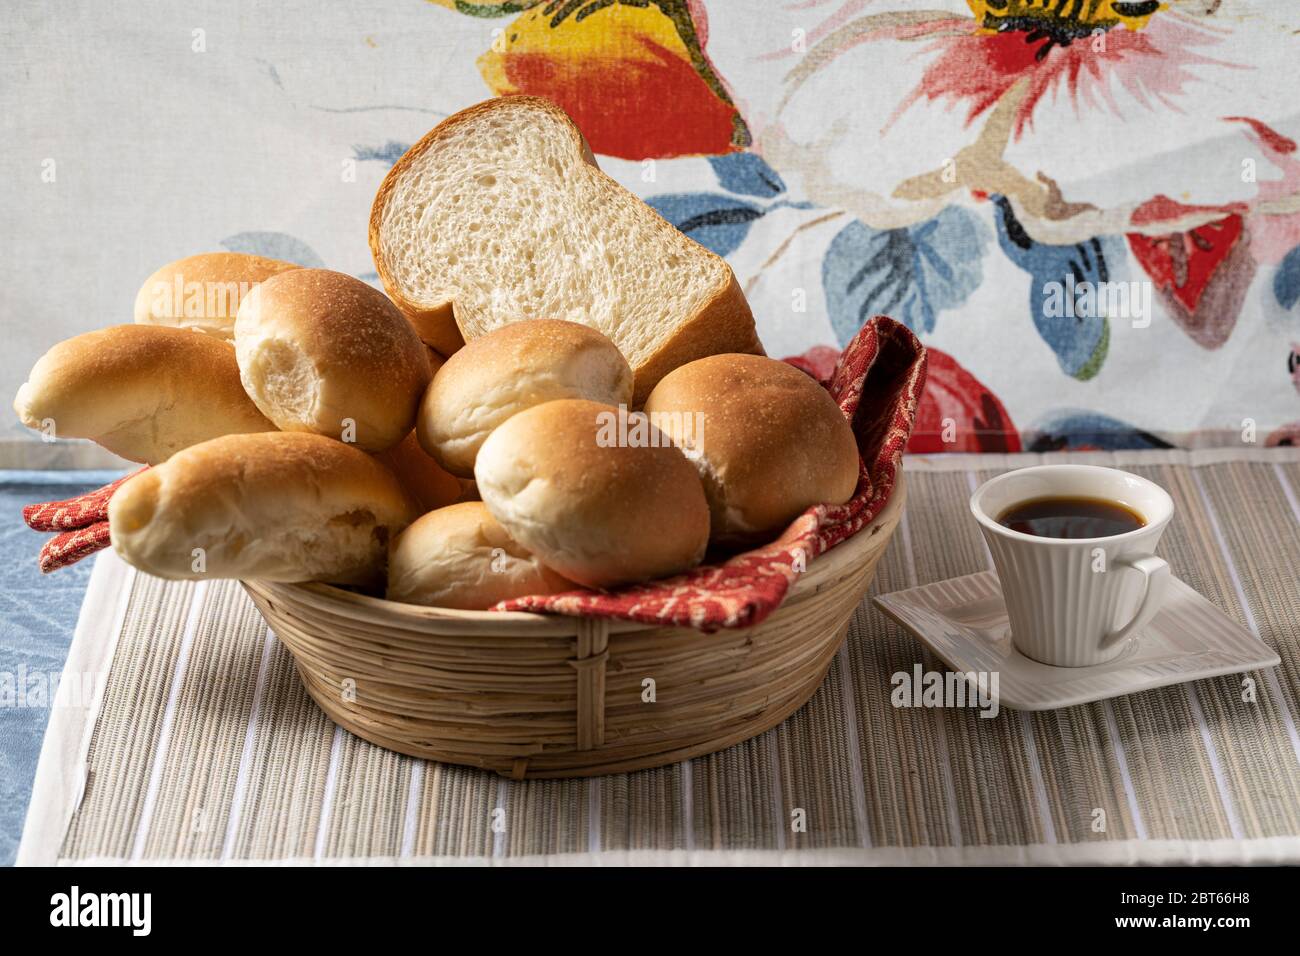 Assorted breads on a basket good breakfast Stock Photo